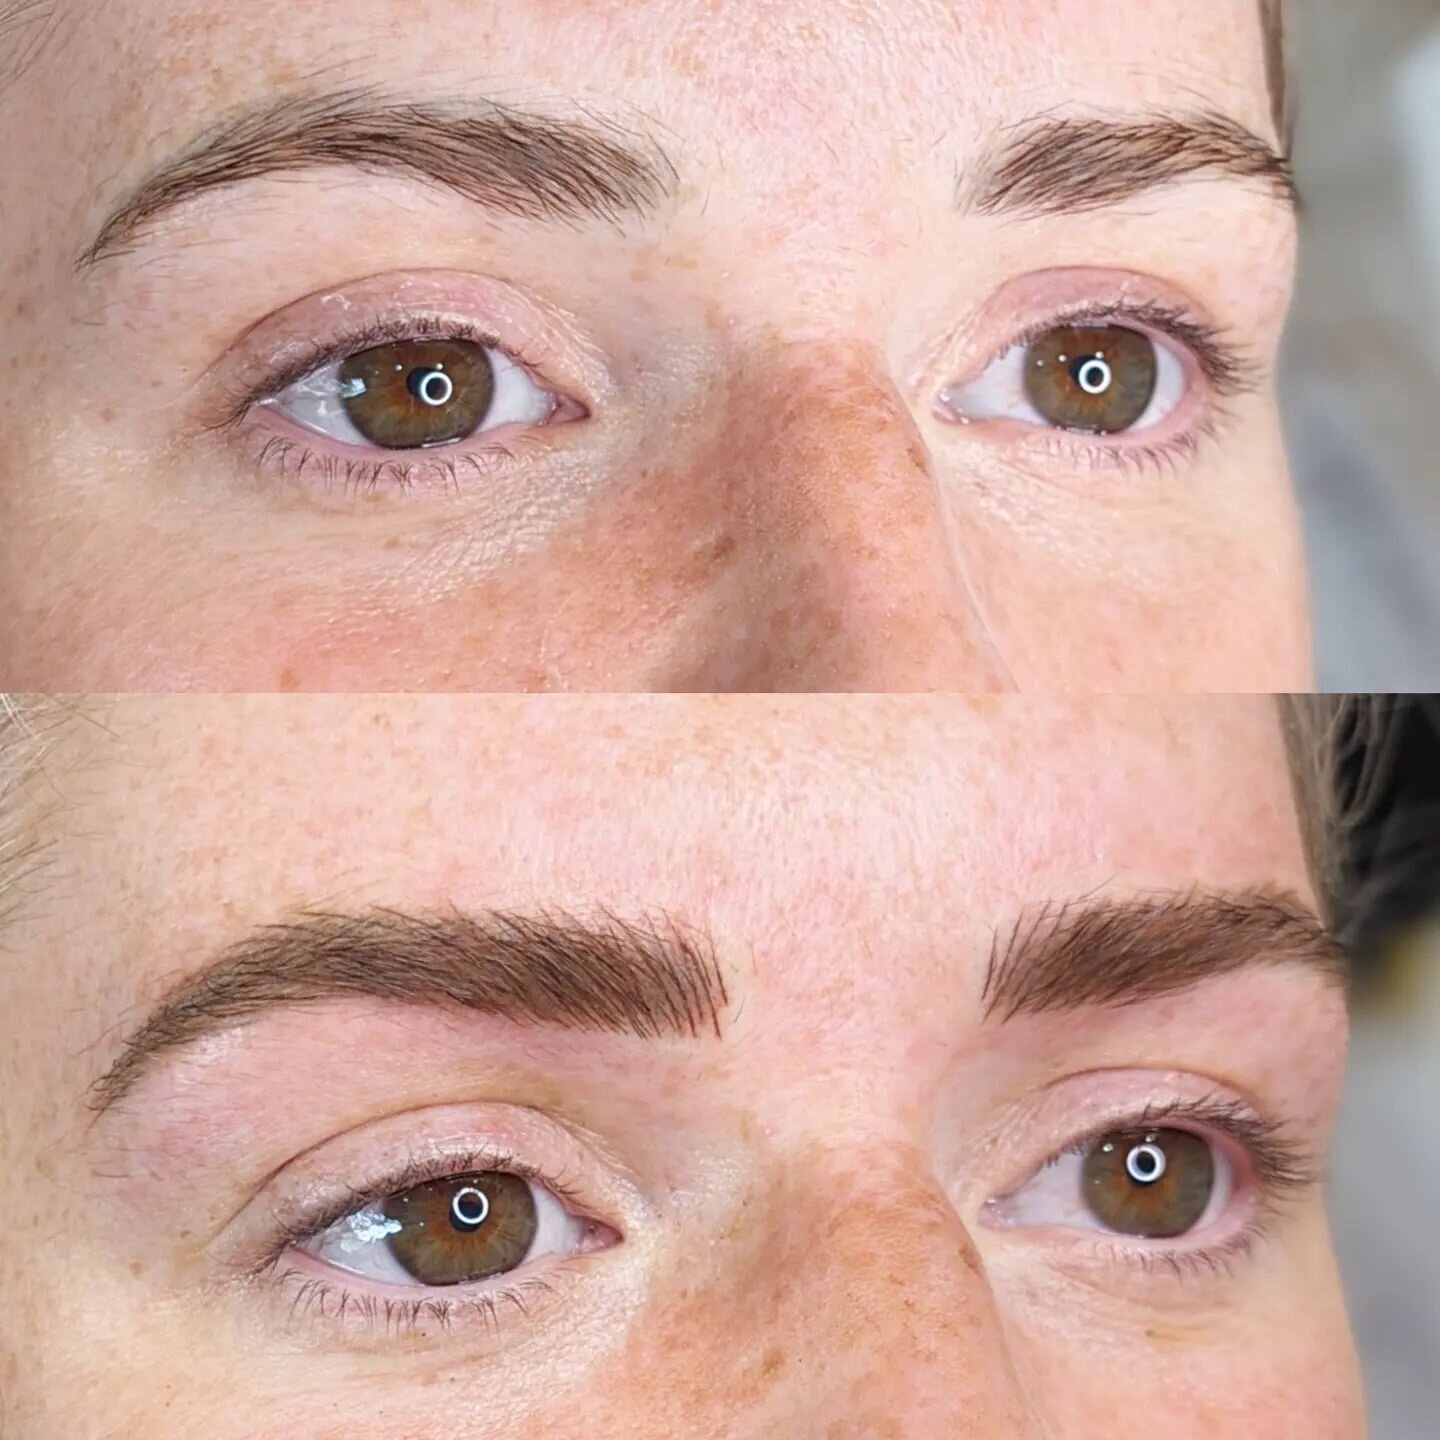 Full and fluffy looking microbladed hairstrokes.

For enquiries, availability or to book please email me by clicking on the website link in my bio.

#fluffybrowsmicroblading #microblading #eyebrows #browtattoo#wynyard #roxbrows #spmu #combinationbrow